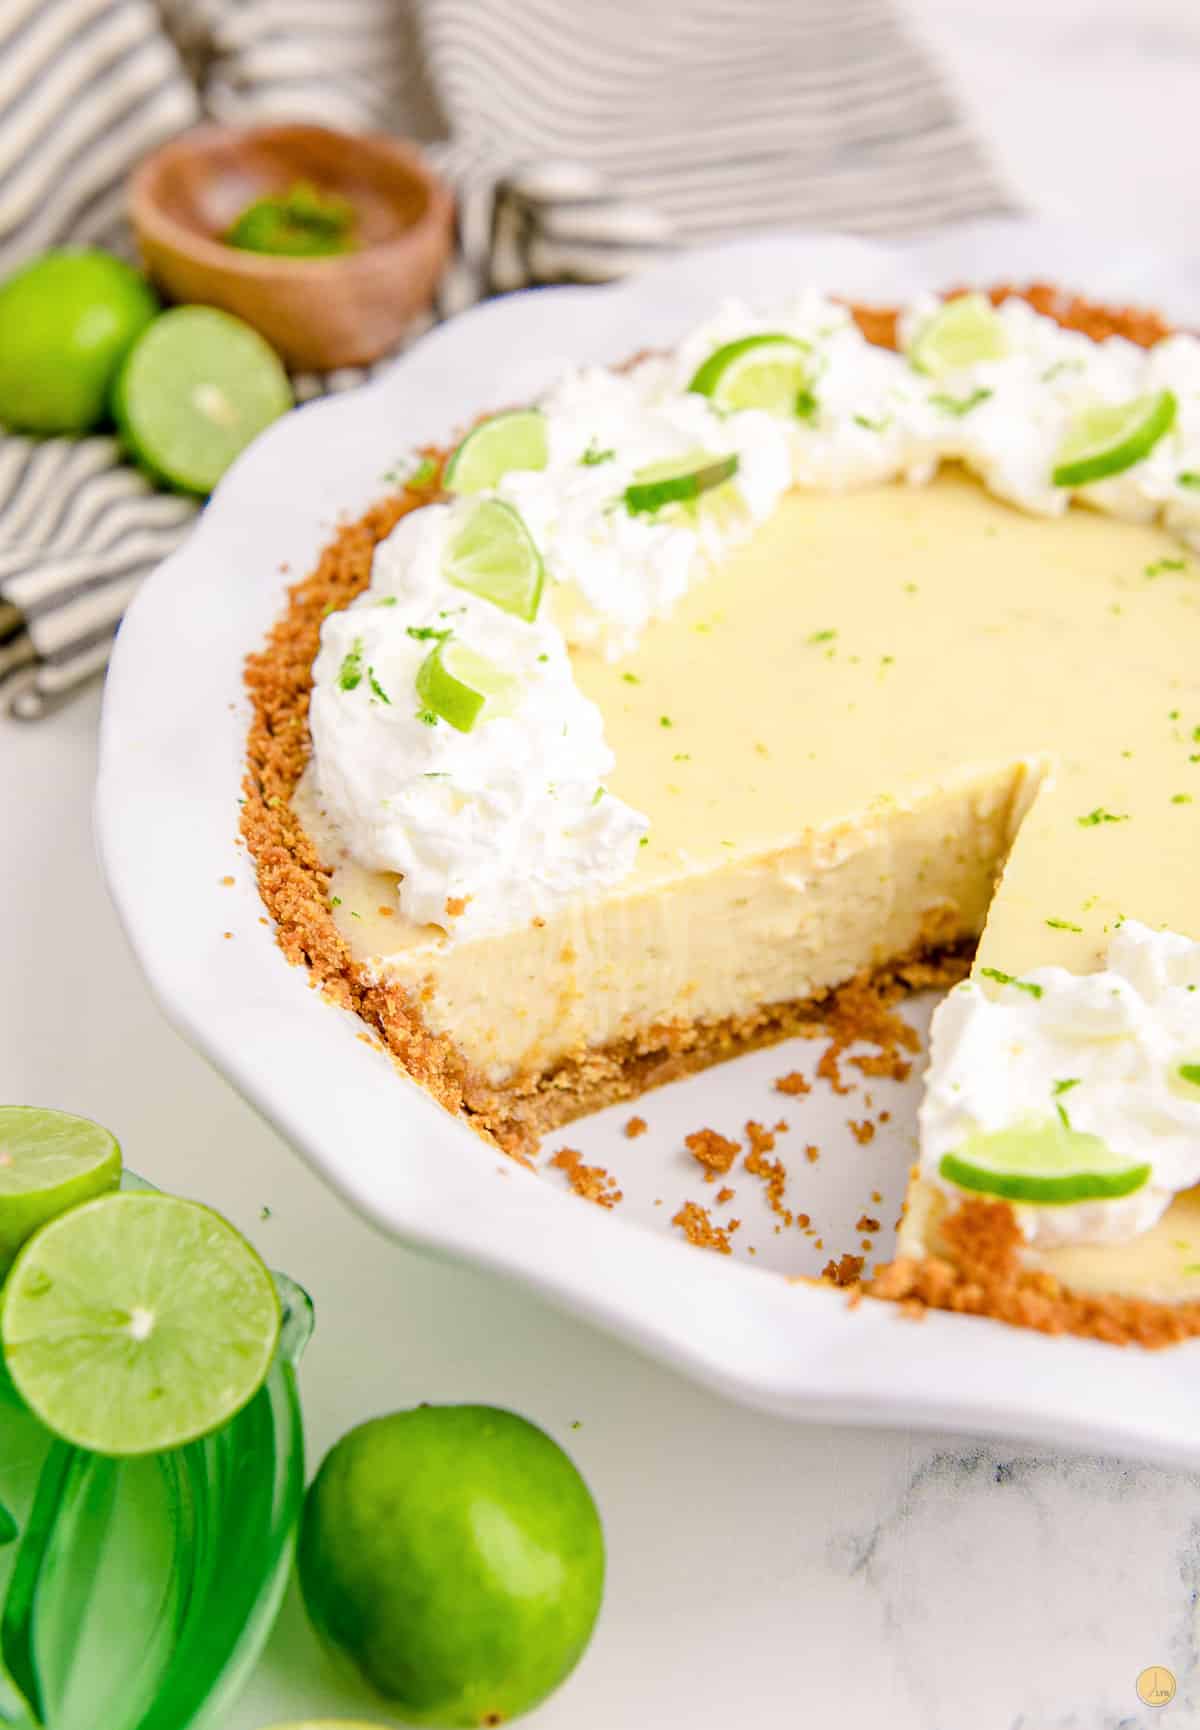 key lime pie with a slice missing